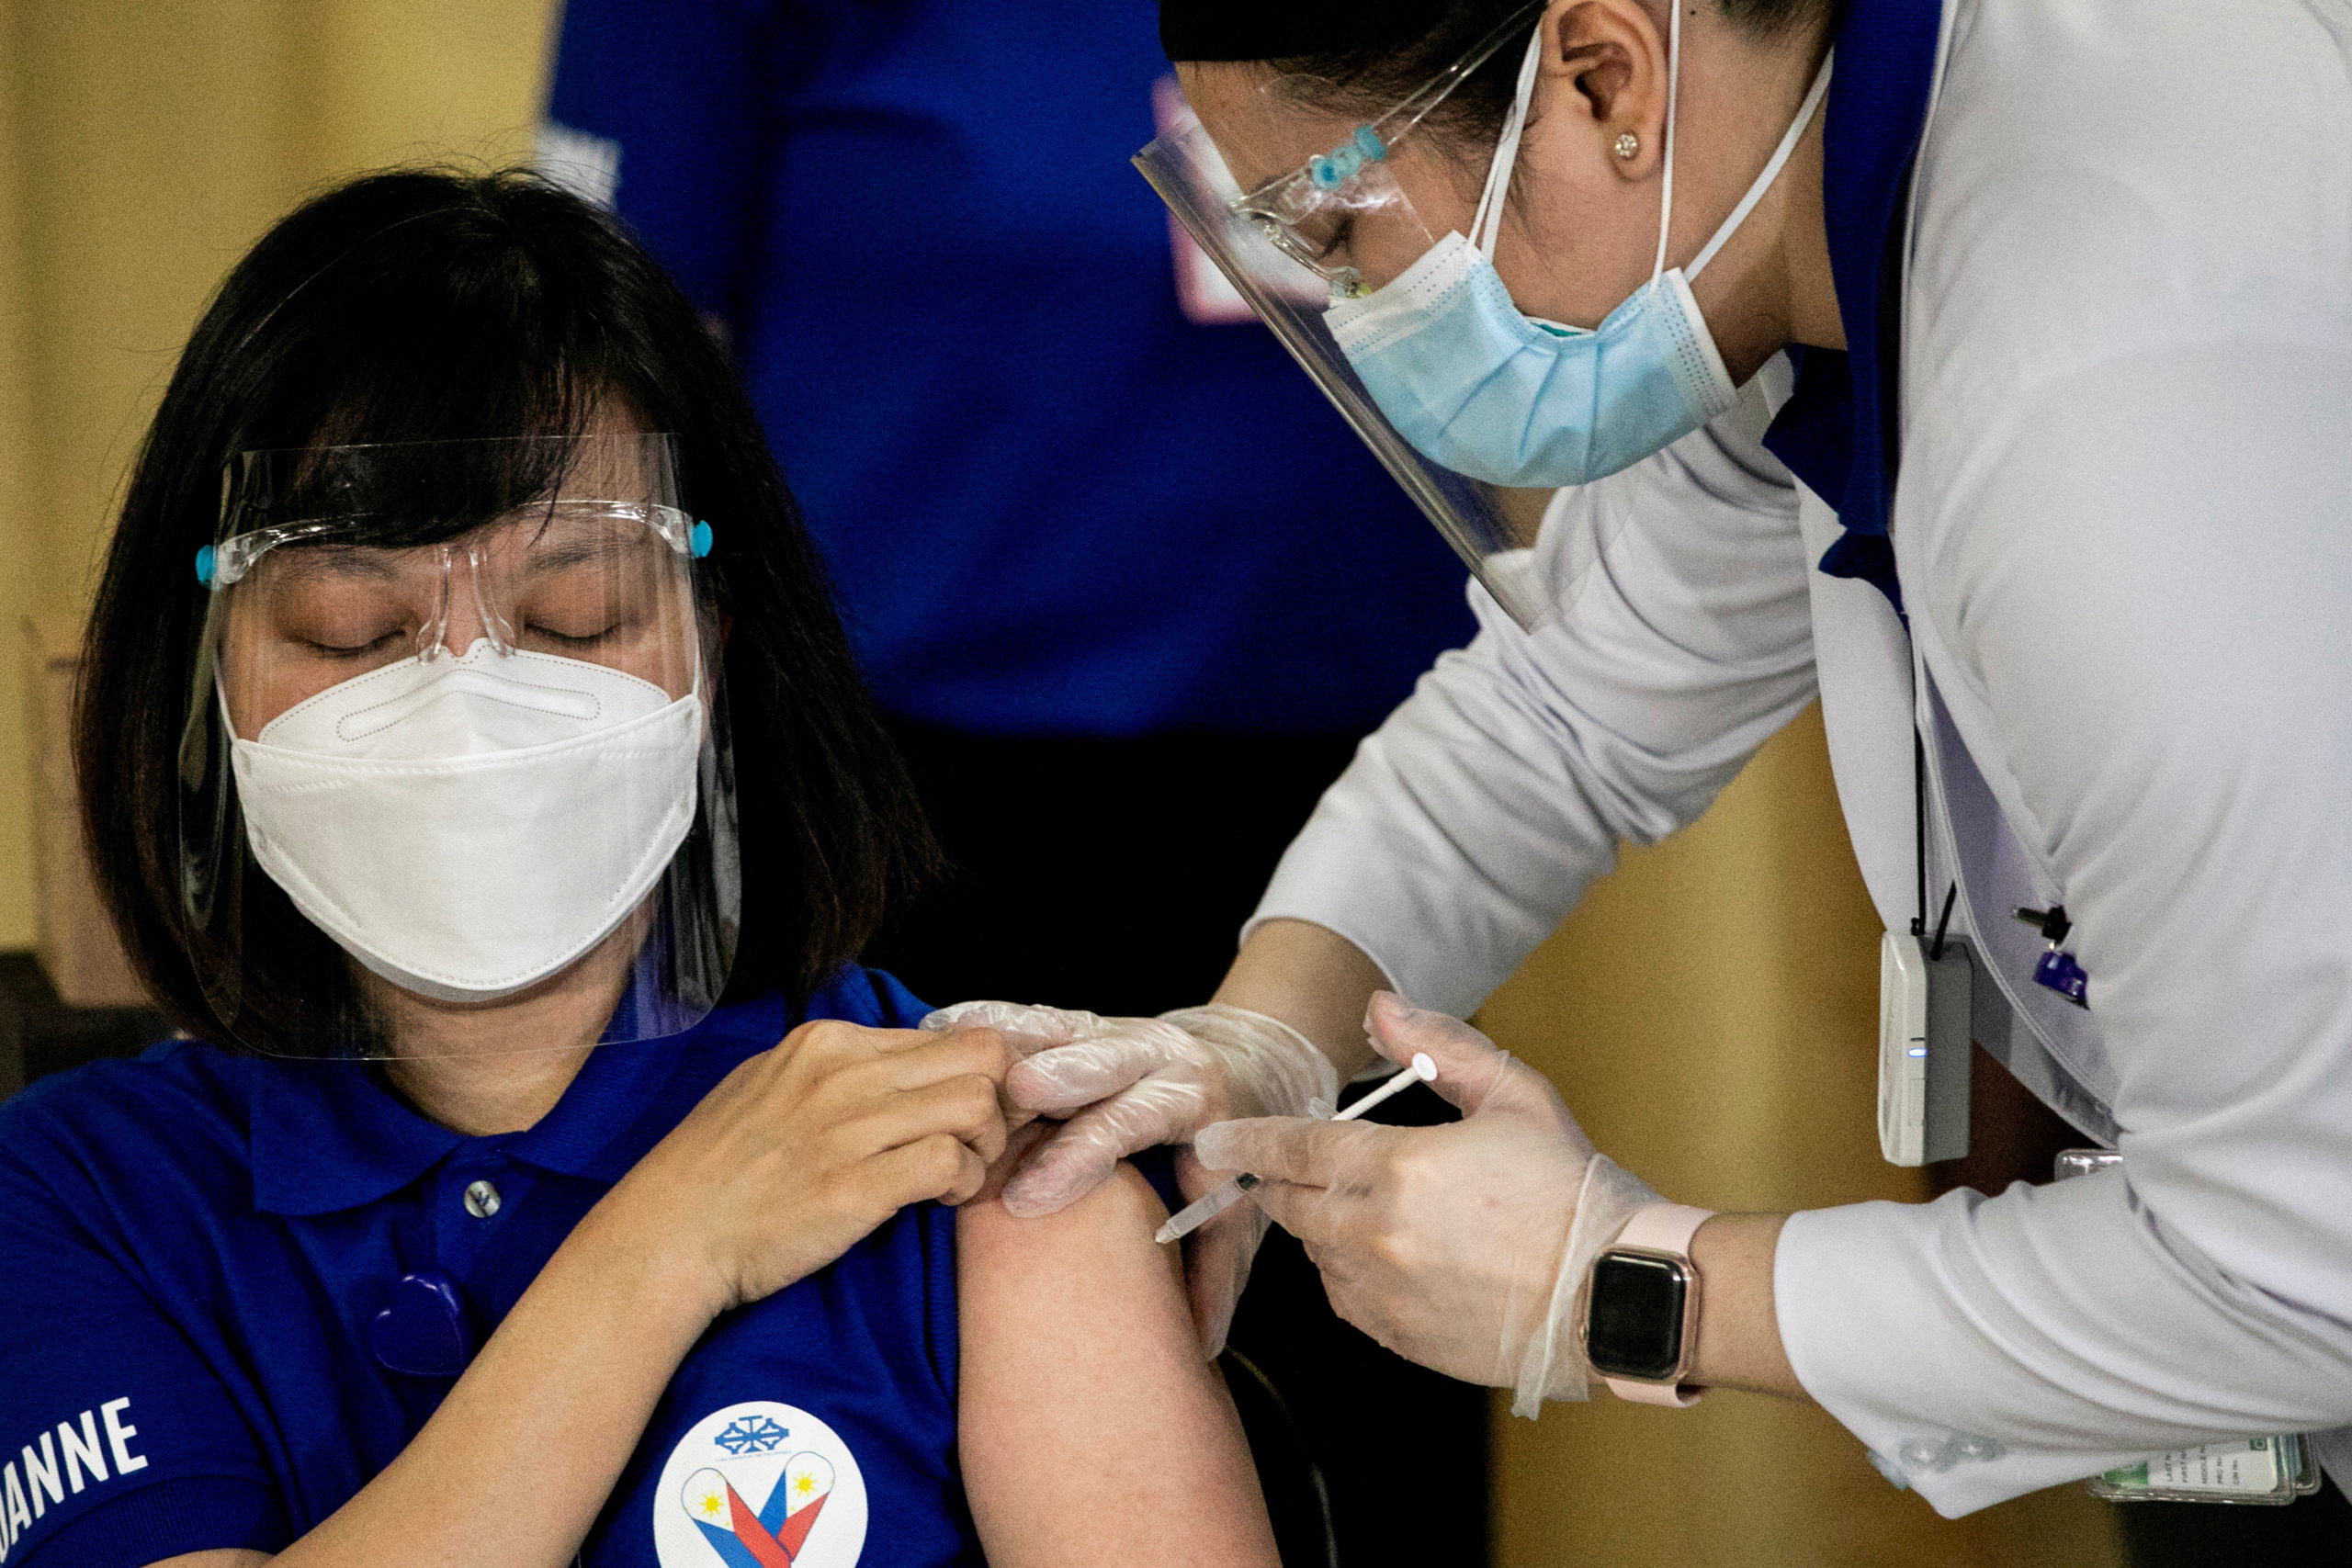 A health worker receives the Sinovac Biotech's Coronavac vaccine on the first day of the coronavirus disease (COVID-19) inoculation drive in the Philippines, at the Lung Center of the Philippines, Quezon City, Metro Manila, March 1, 2021. REUTERS/Eloisa Lopez